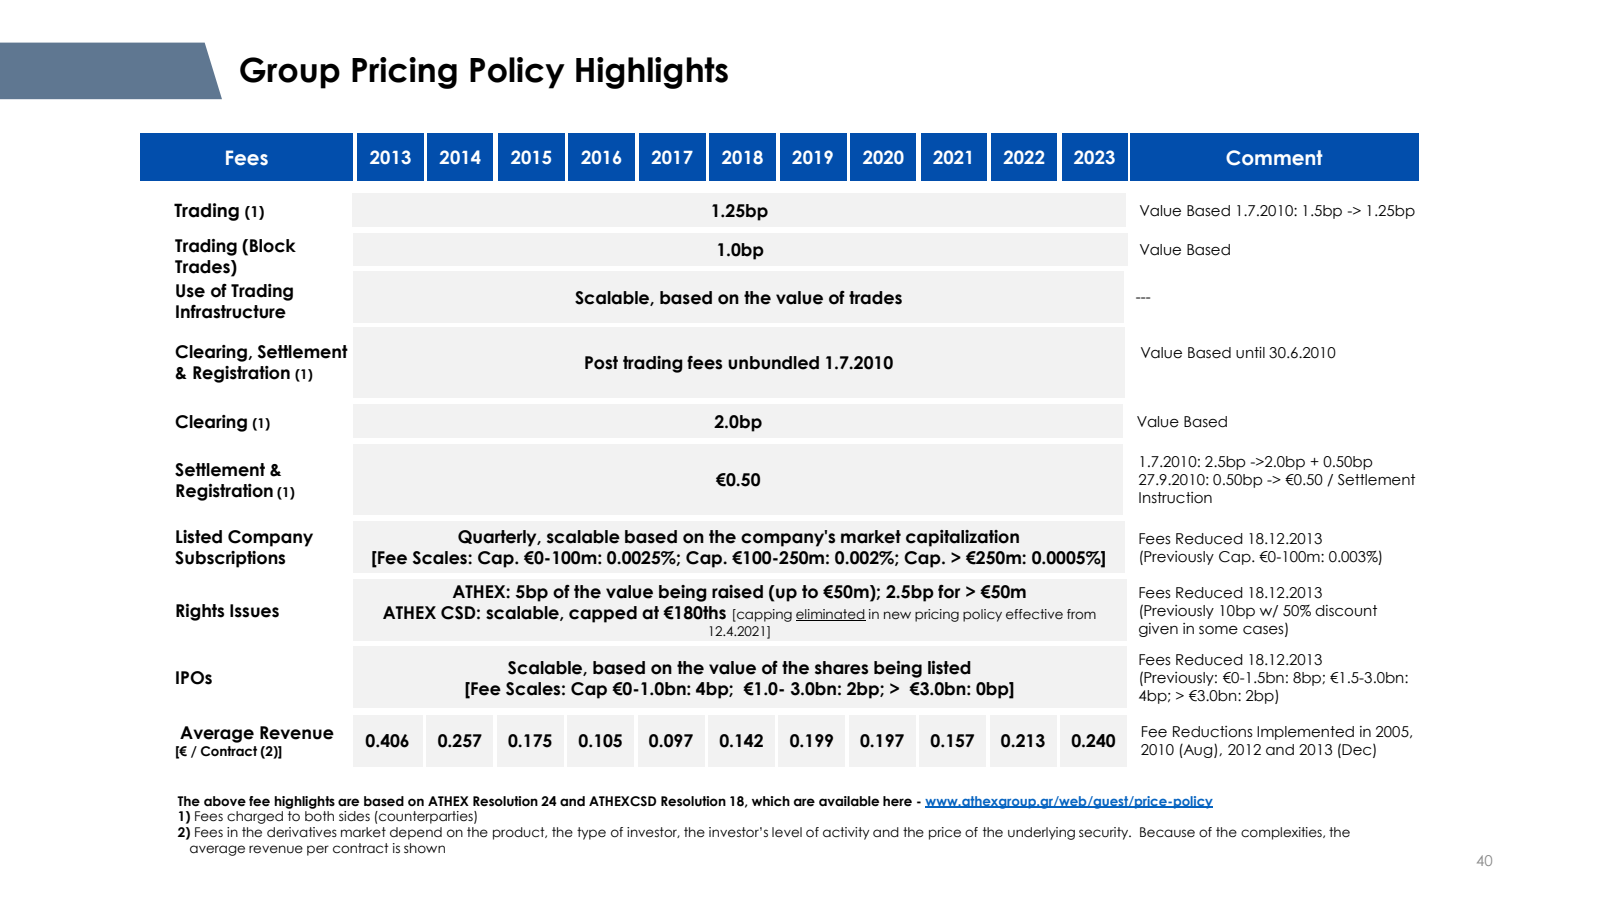 Group Pricing Policy